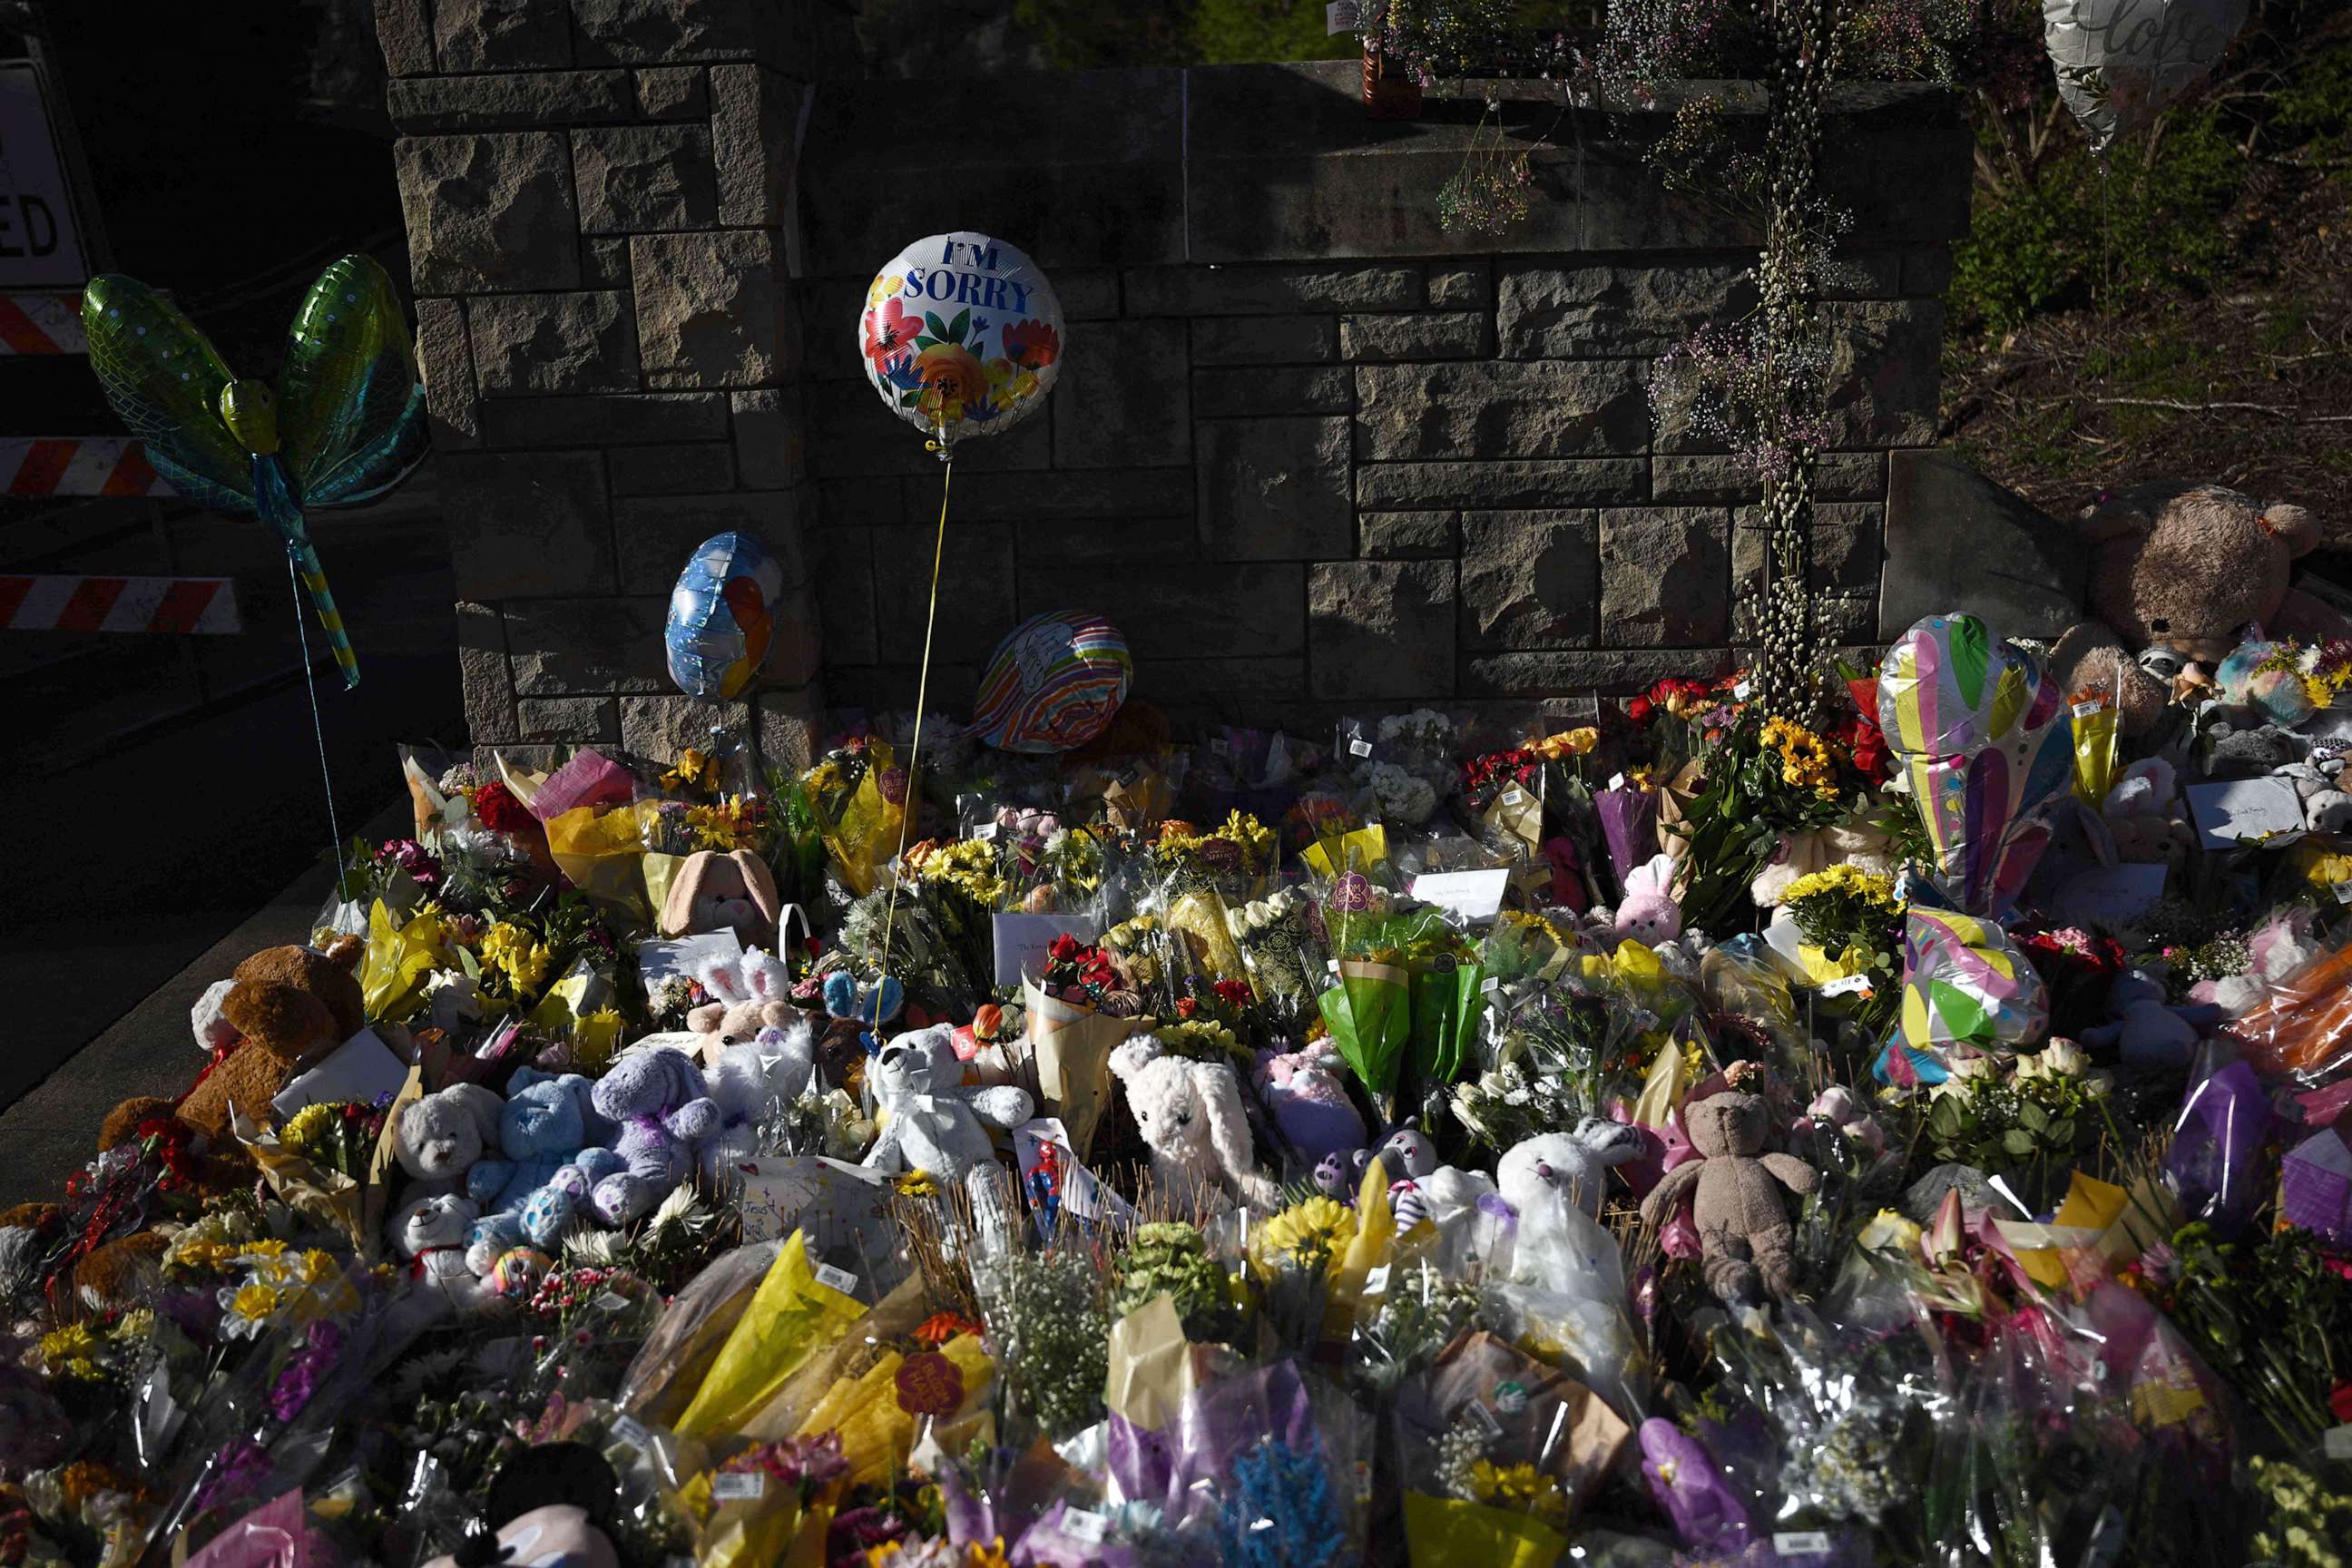 PHOTO: Balloons, flowers and other items left at a makeshift memorial for school shooting victims by the Covenant School building at the Covenant Presbyterian Church in Nashville, Tenn., March 29, 2023.